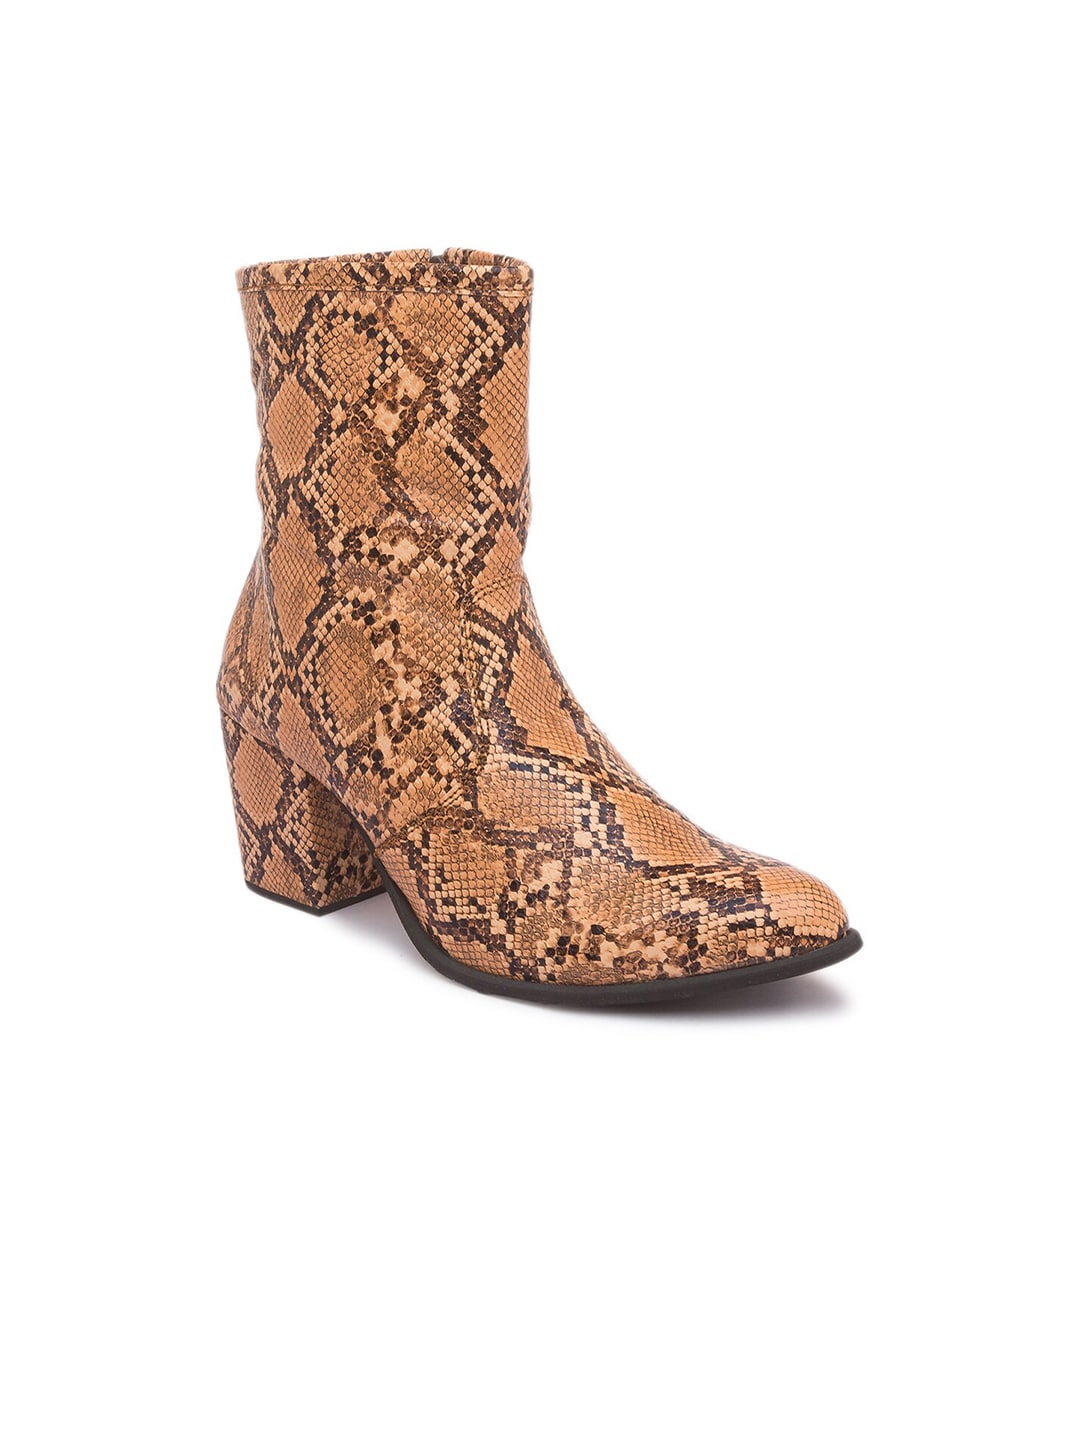 Sole To Soul Women Tan Brown & Black Snake-Skin Printed Heeled Boots Price in India